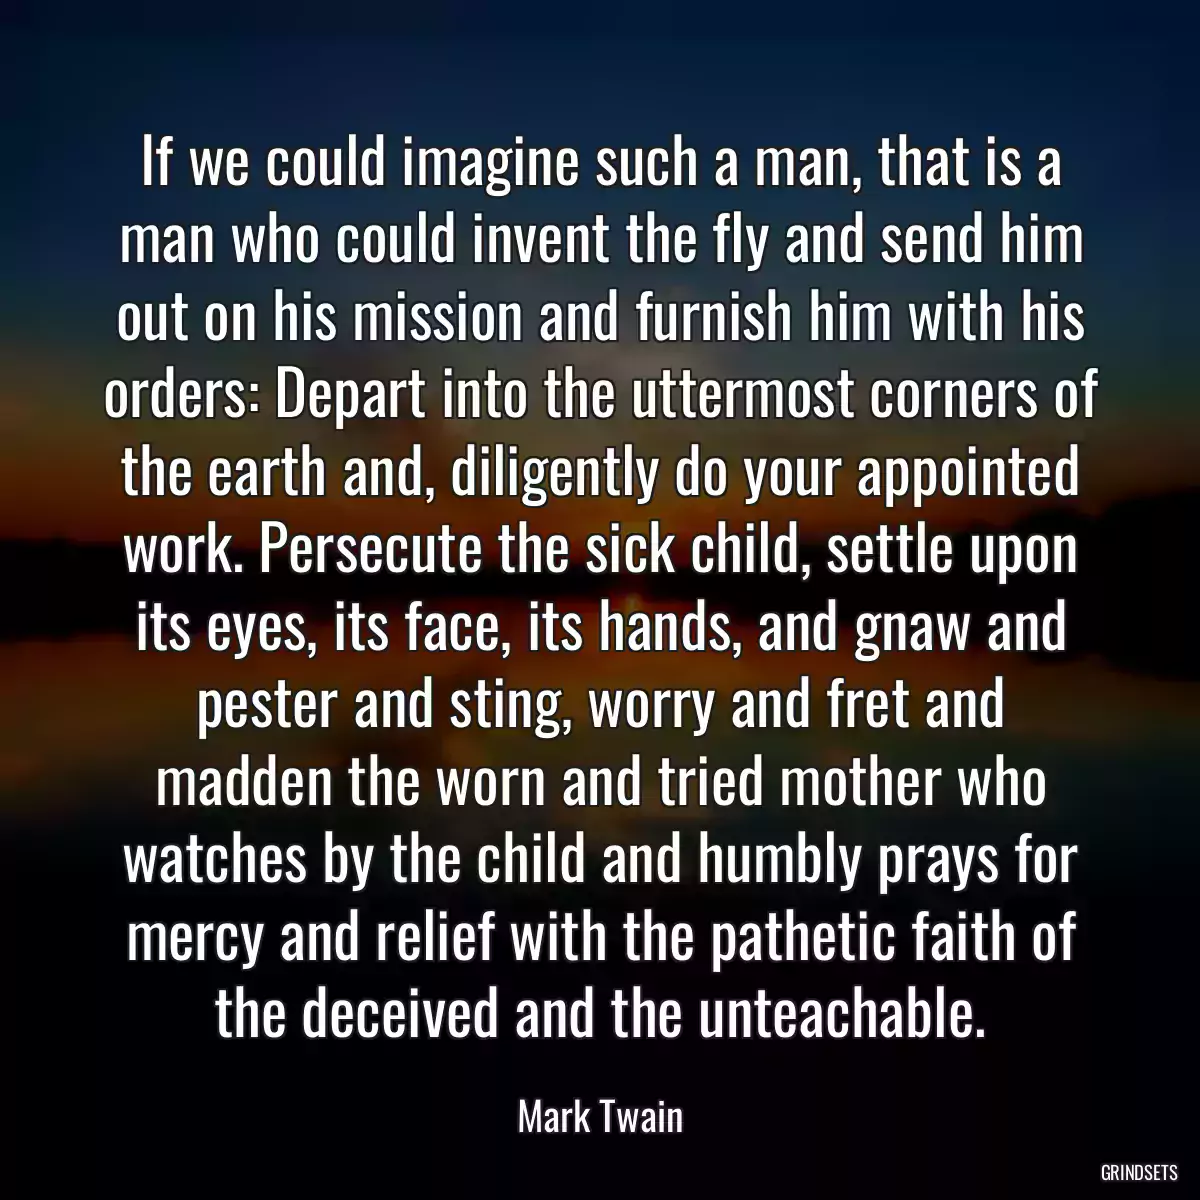 If we could imagine such a man, that is a man who could invent the fly and send him out on his mission and furnish him with his orders: Depart into the uttermost corners of the earth and, diligently do your appointed work. Persecute the sick child, settle upon its eyes, its face, its hands, and gnaw and pester and sting, worry and fret and madden the worn and tried mother who watches by the child and humbly prays for mercy and relief with the pathetic faith of the deceived and the unteachable.